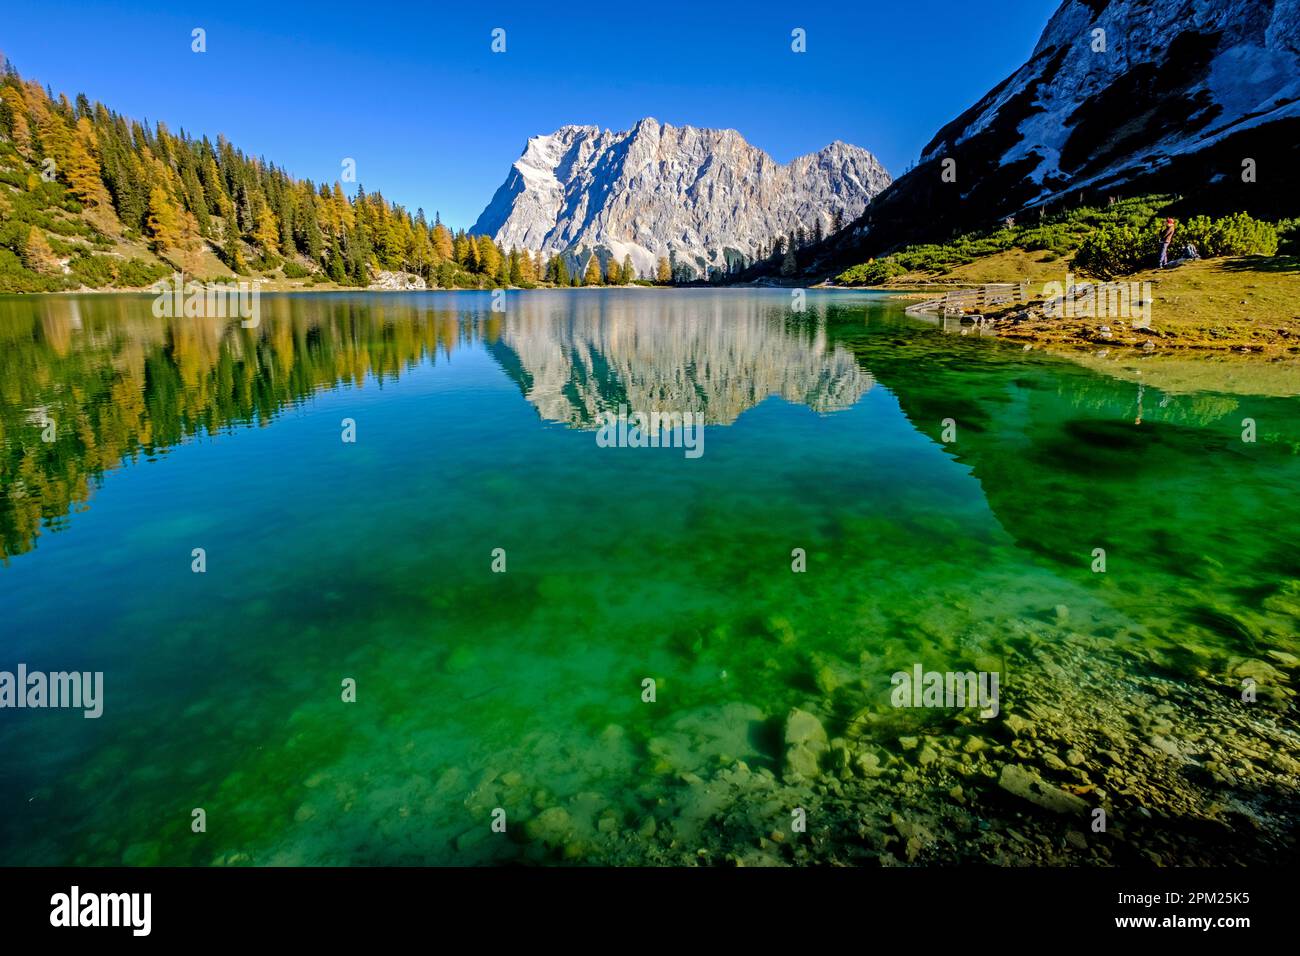 Seebensee Lake, Zugspitze and Wetterstein mountains in back, Mieminger Mountains, Ehrwald, Tyrol, Austria, Autumn Stock Photo